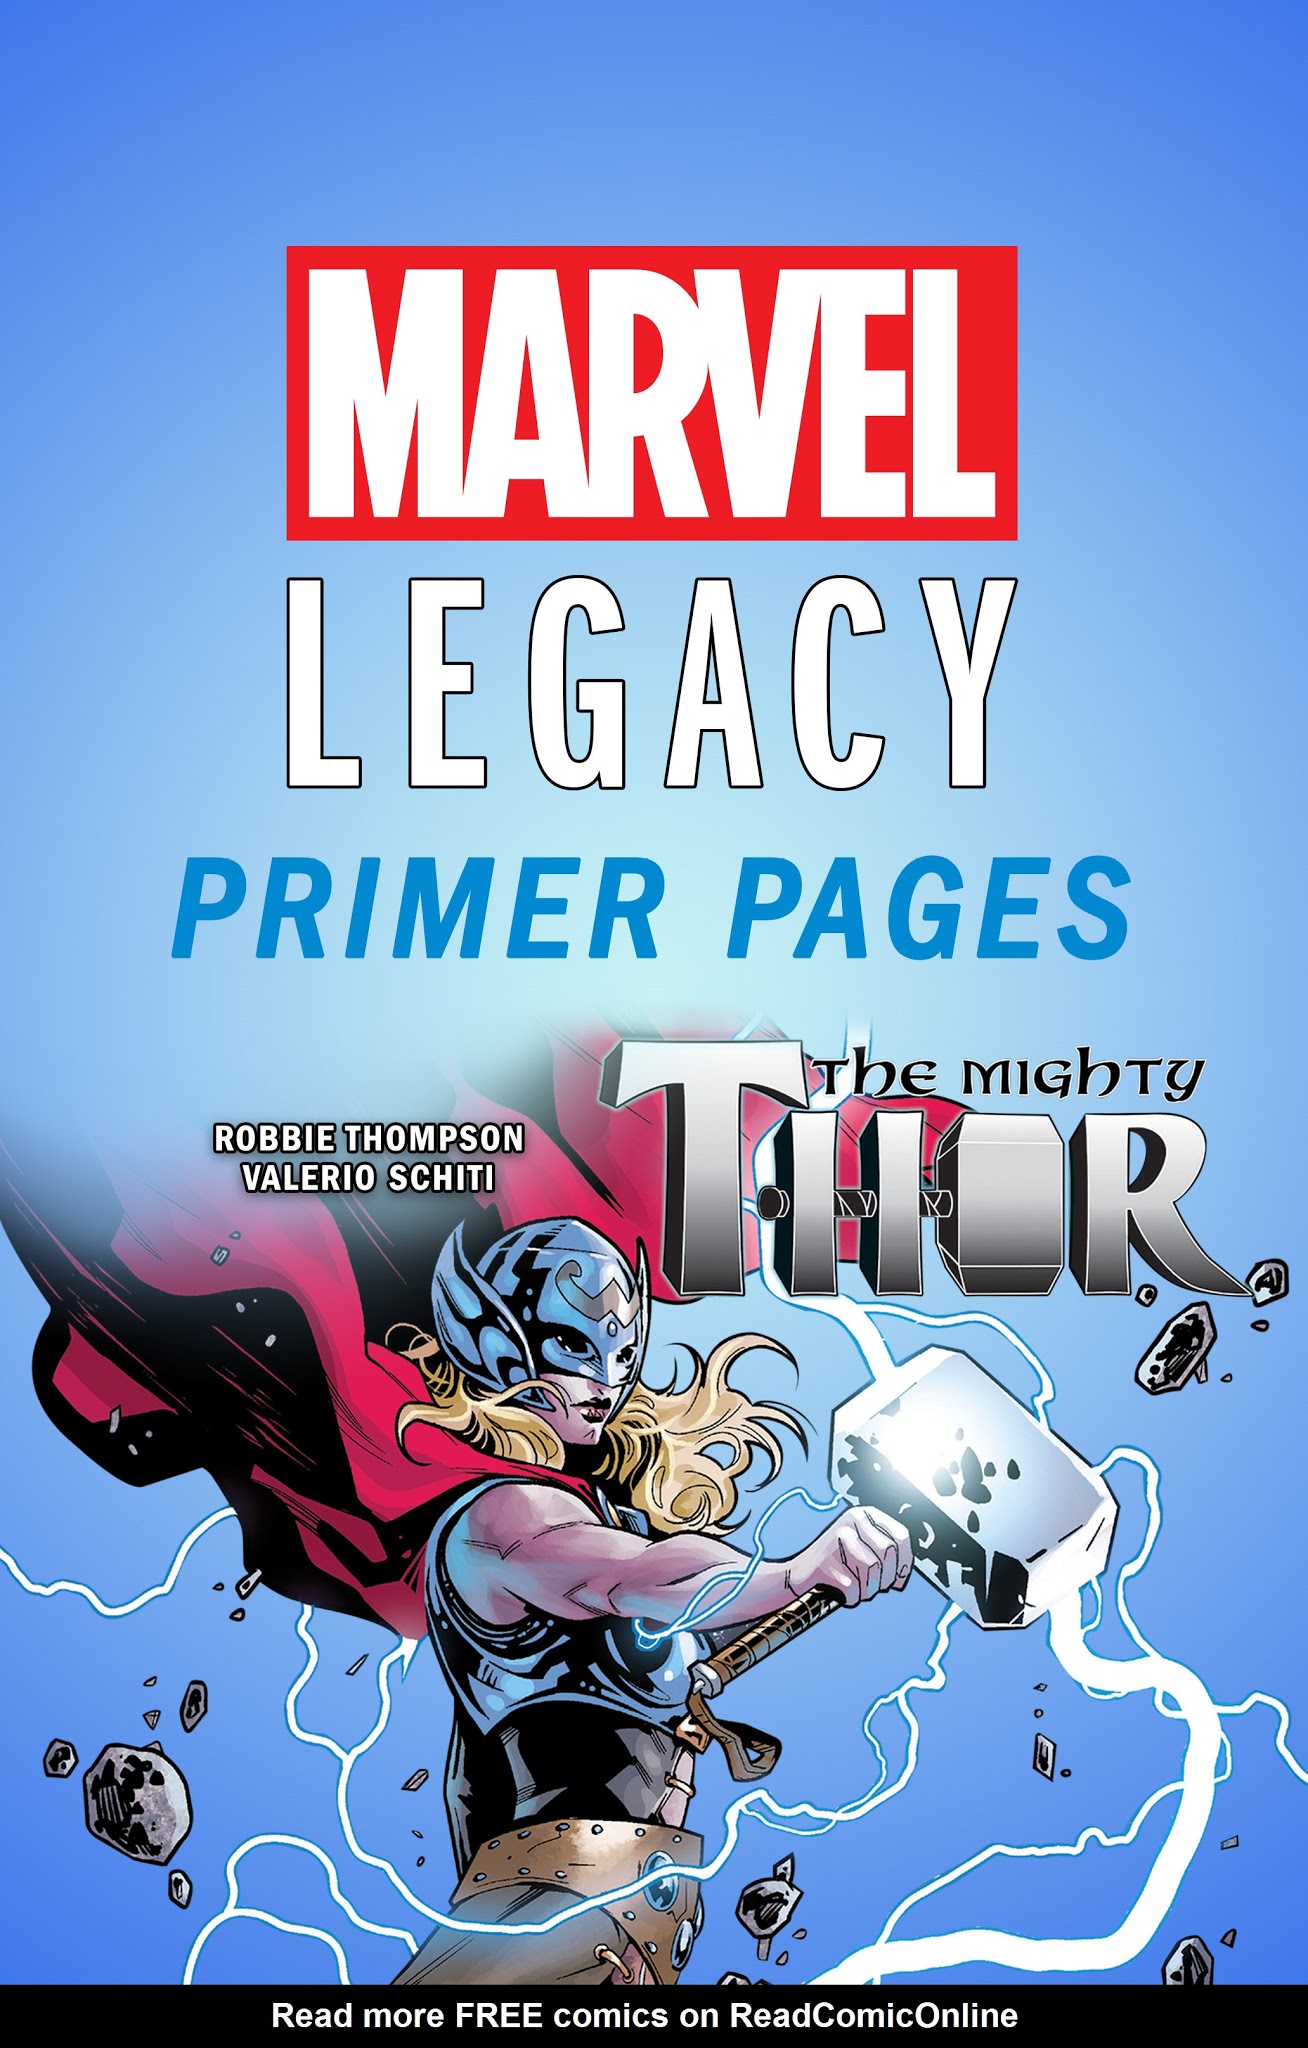 Read online Mighty Thor (2016) comic -  Issue # Issue The Mighty Thor - Marvel Legacy Primer Pages - 1